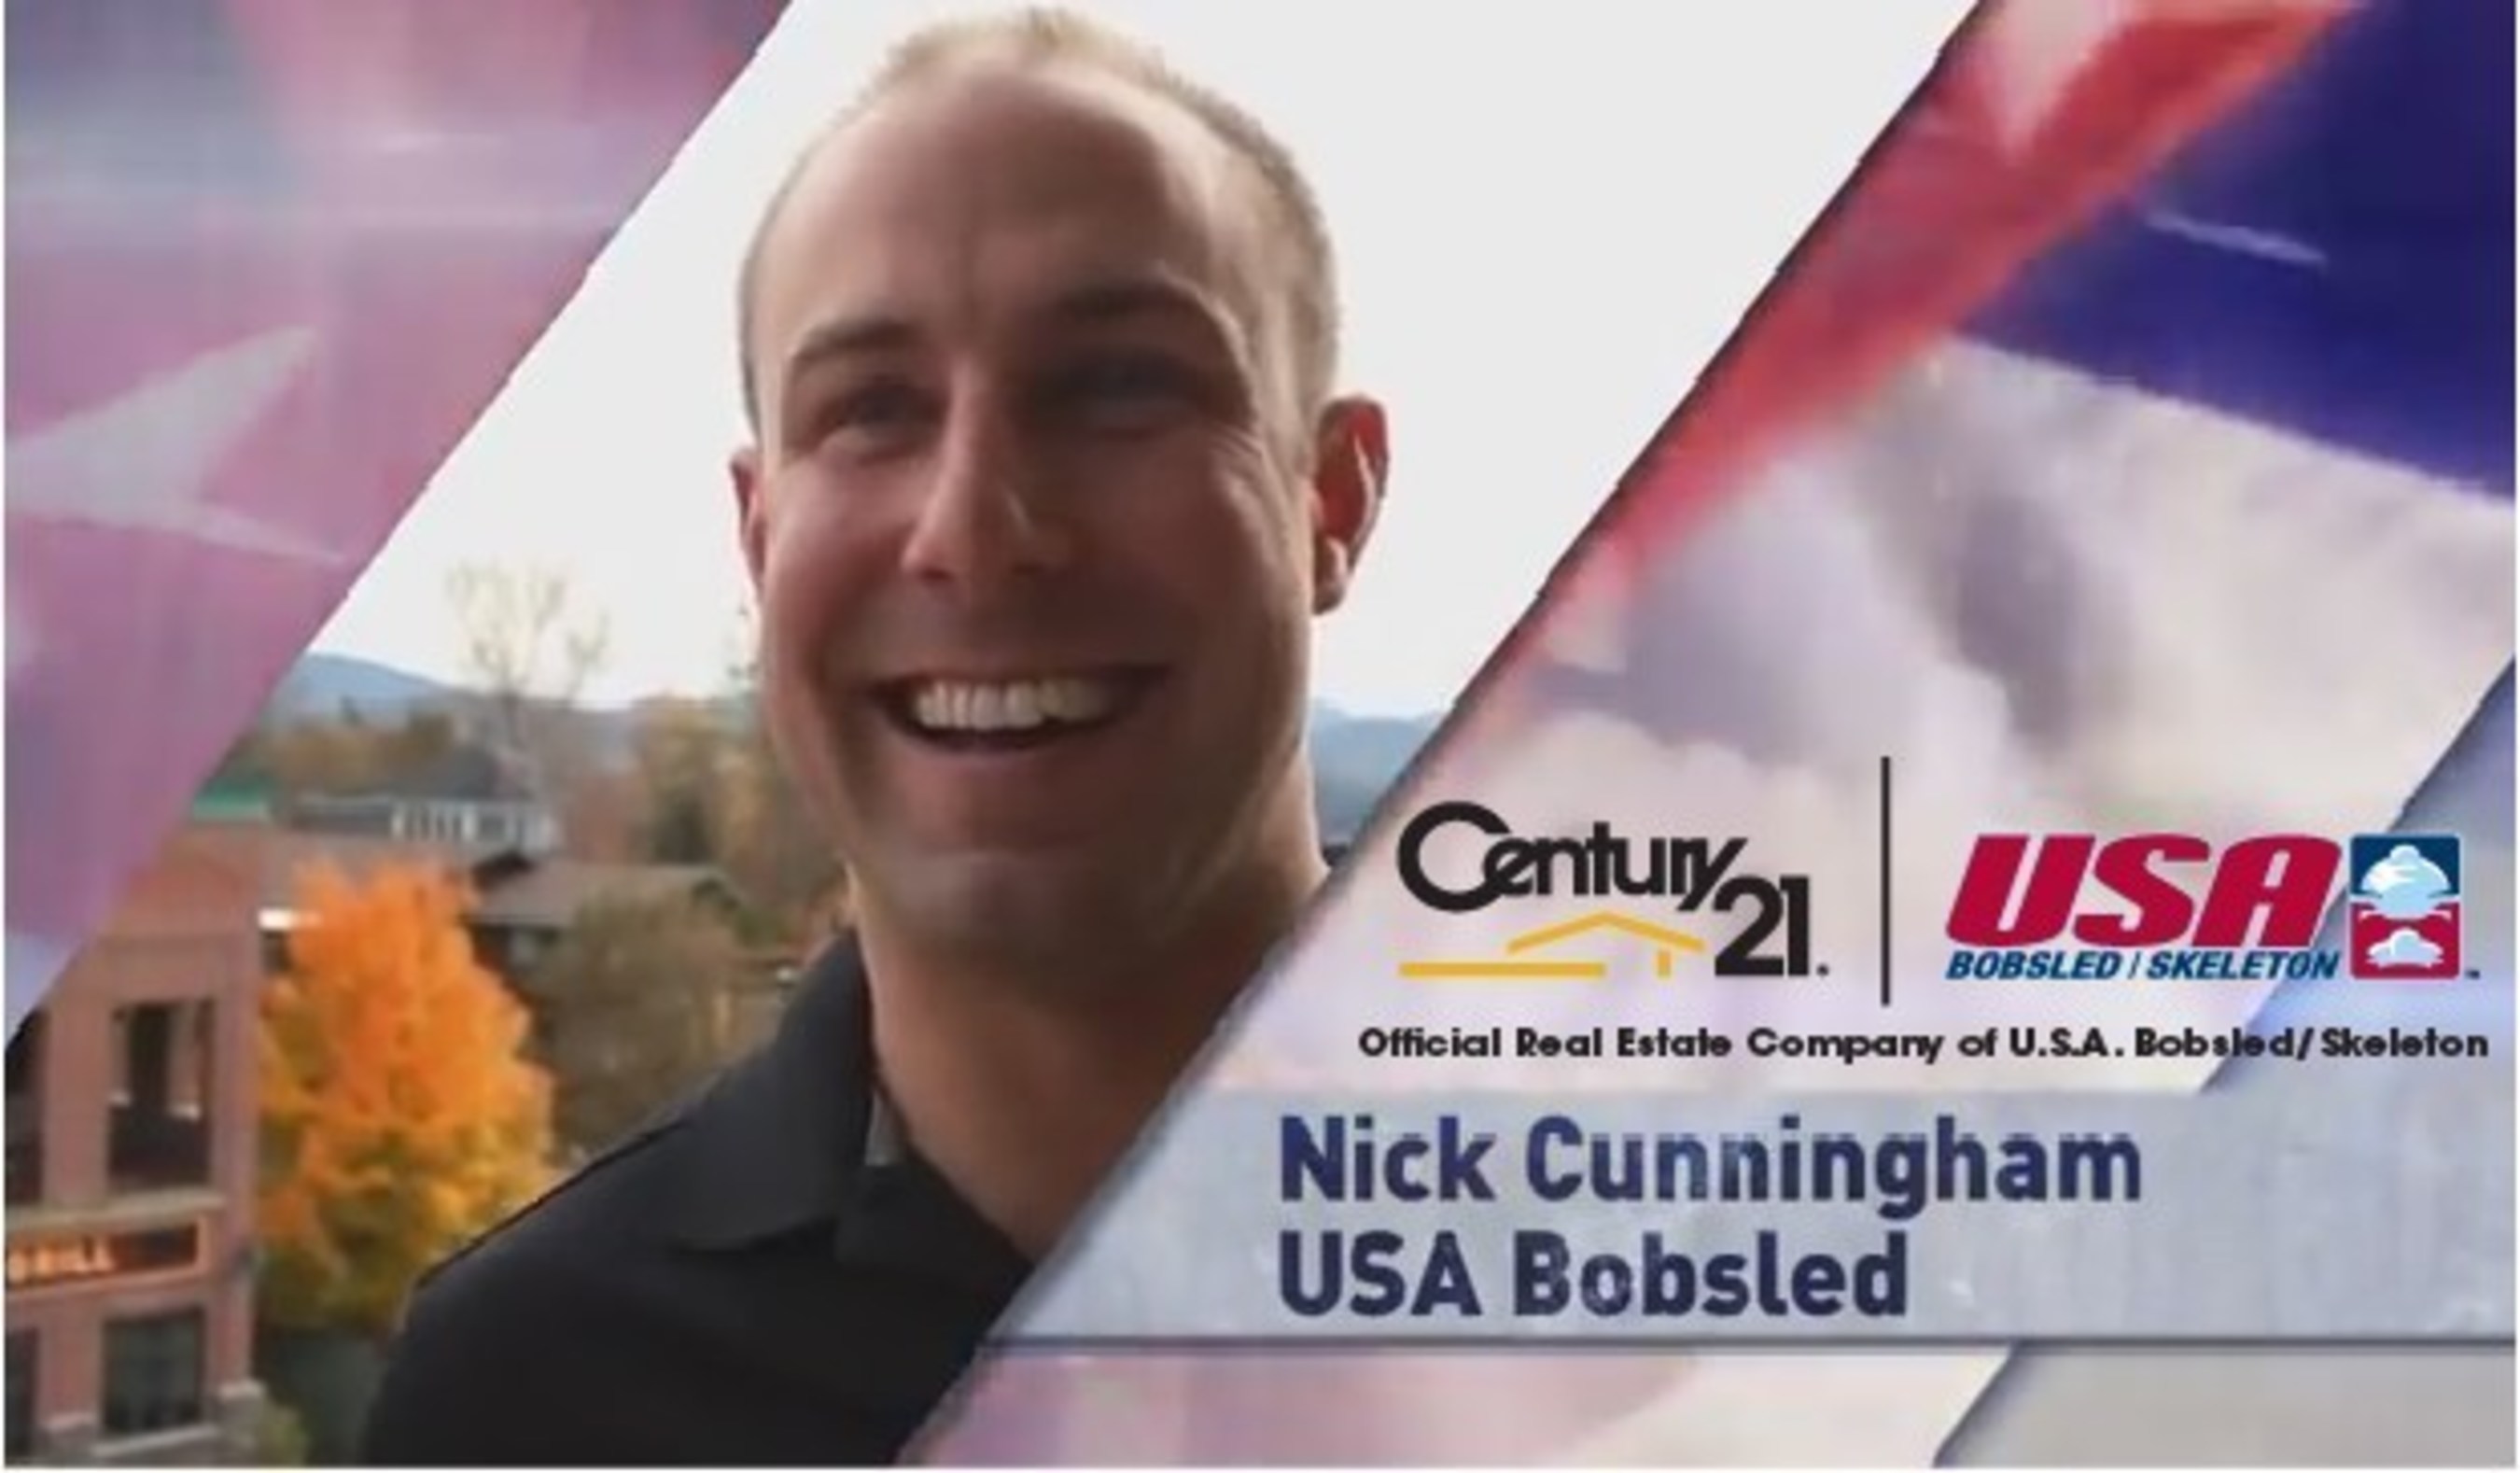 Nick Cunningham, a Sergeant in the New York National Guard and two-time Olympian, will be piloting the CENTURY 21 Real Estate brand's two-man bobsled during the entire 2014-2015 World Cup season.